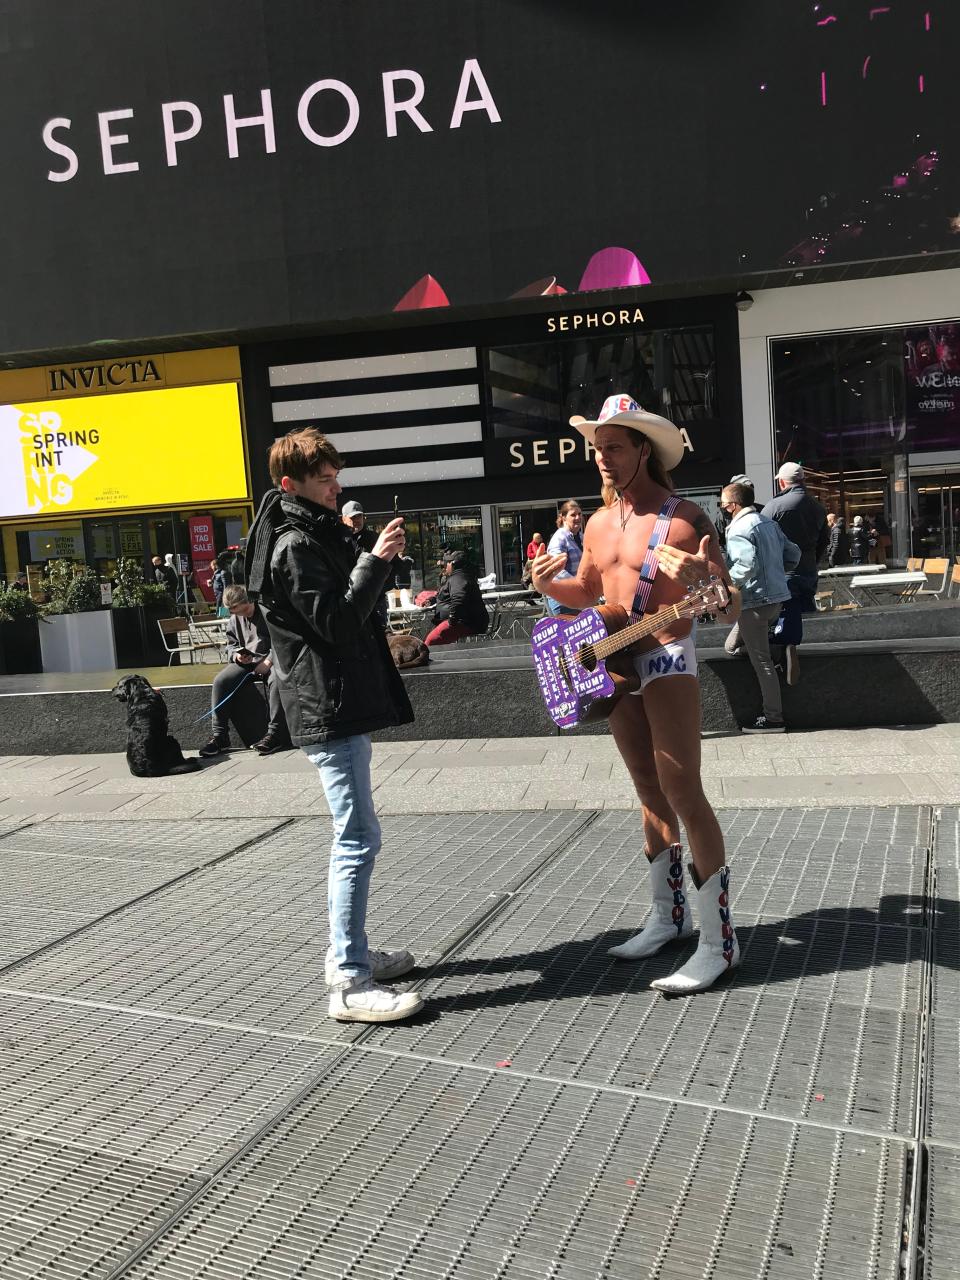 Robert Burk, 49, has performed as the Naked Cowboy in Times Square for 20 years. Here, he talks to a tourist on a slow Monday.